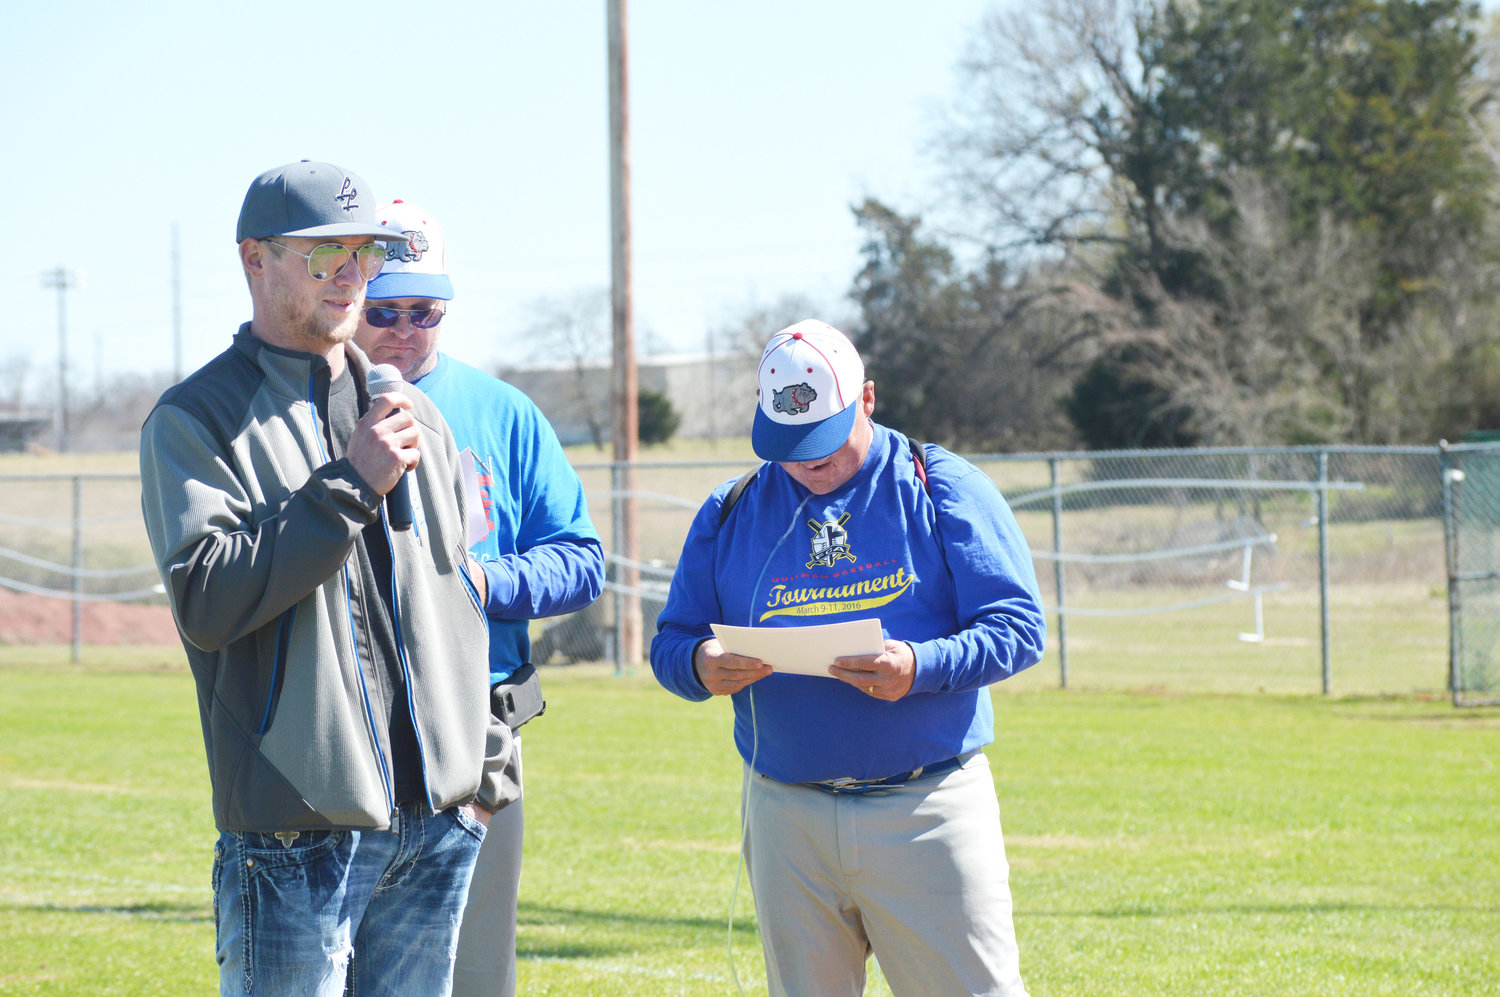 Hayes Peckham, star pitcher for the 2007 Quitman region quarter-final team which was honored at the alumni game Saturday, speaks to those gathered. Peckham went on to play baseball at Dallas Baptist University. Also pictured are Quitman Coach Lee LaPrade and Quitman Head Coach Hayland Hardy.